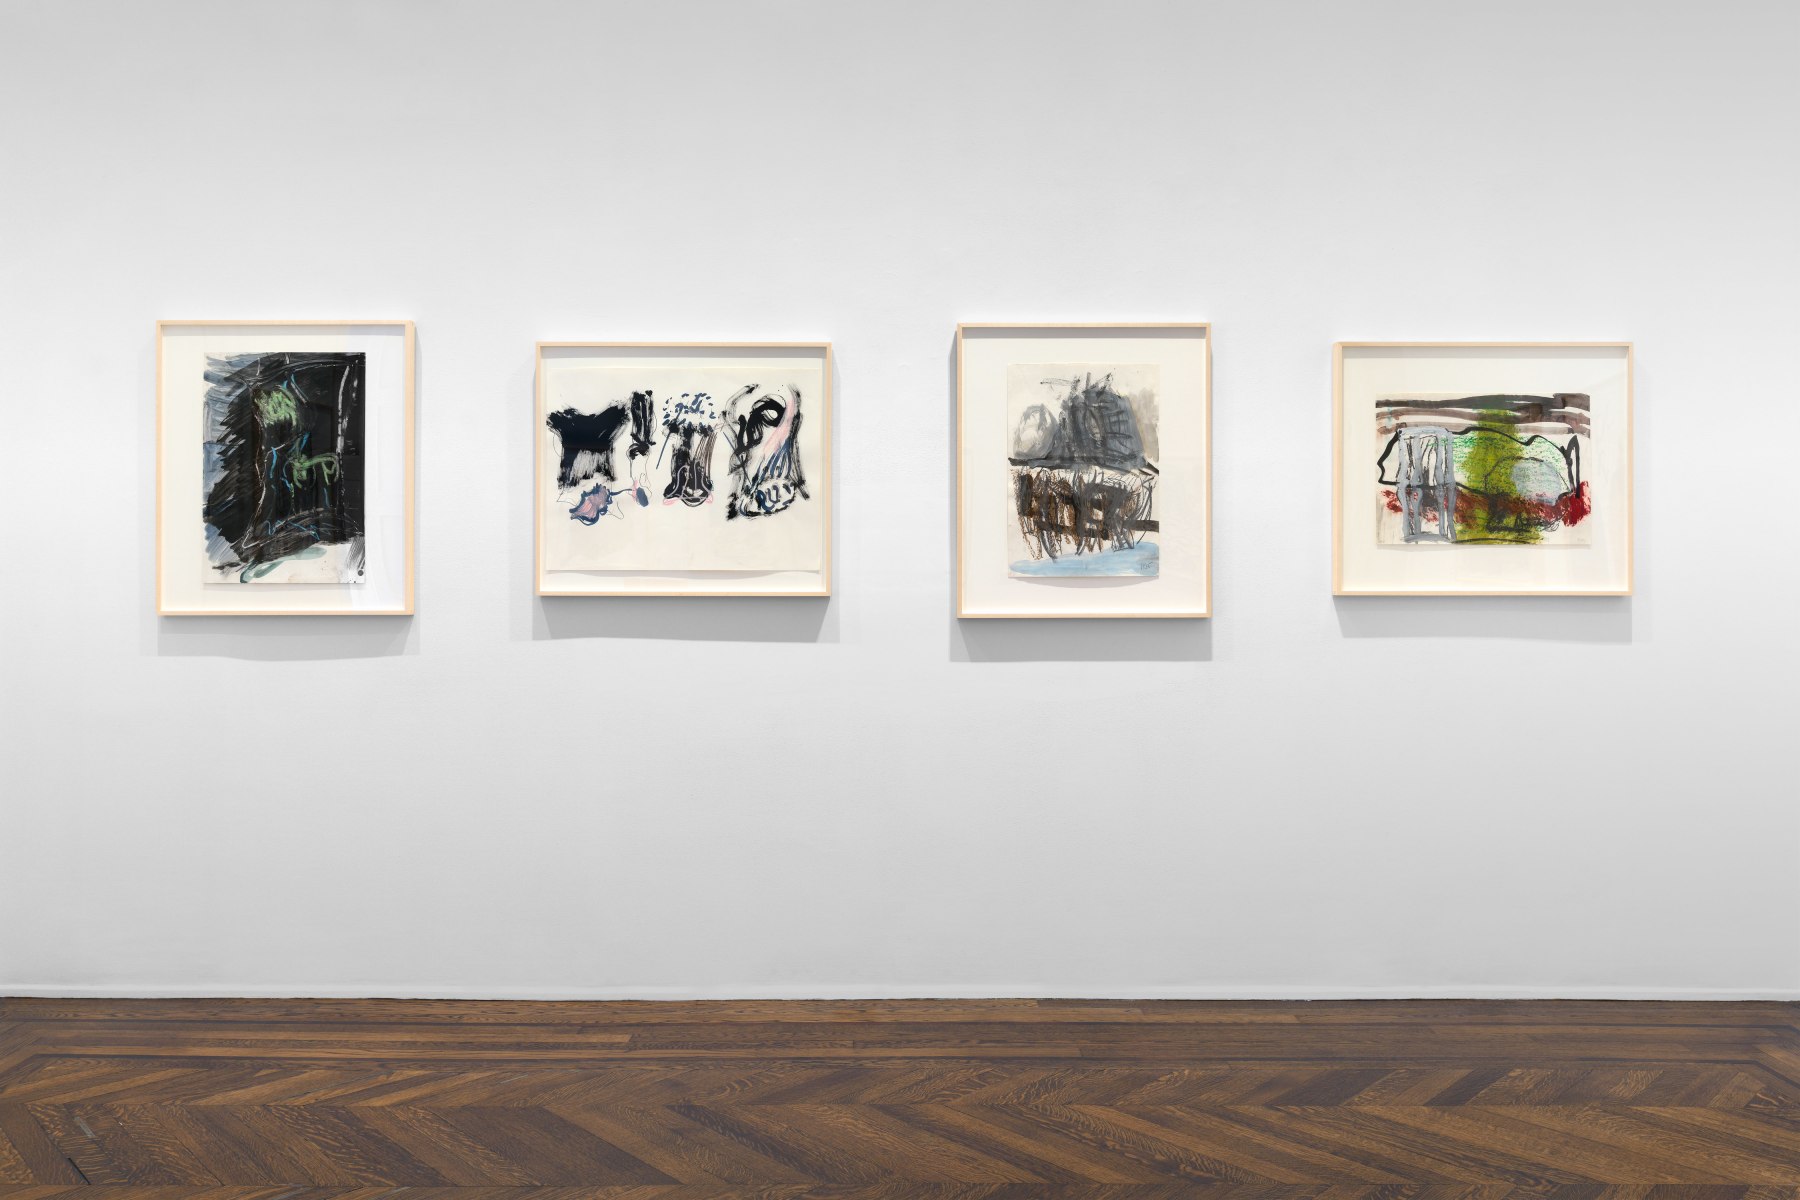 PER KIRKEBY Works on Paper, Works in Brick 20 November 2019 through 25 January 2020 UPPER EAST SIDE, NEW YORK, Installation View 17